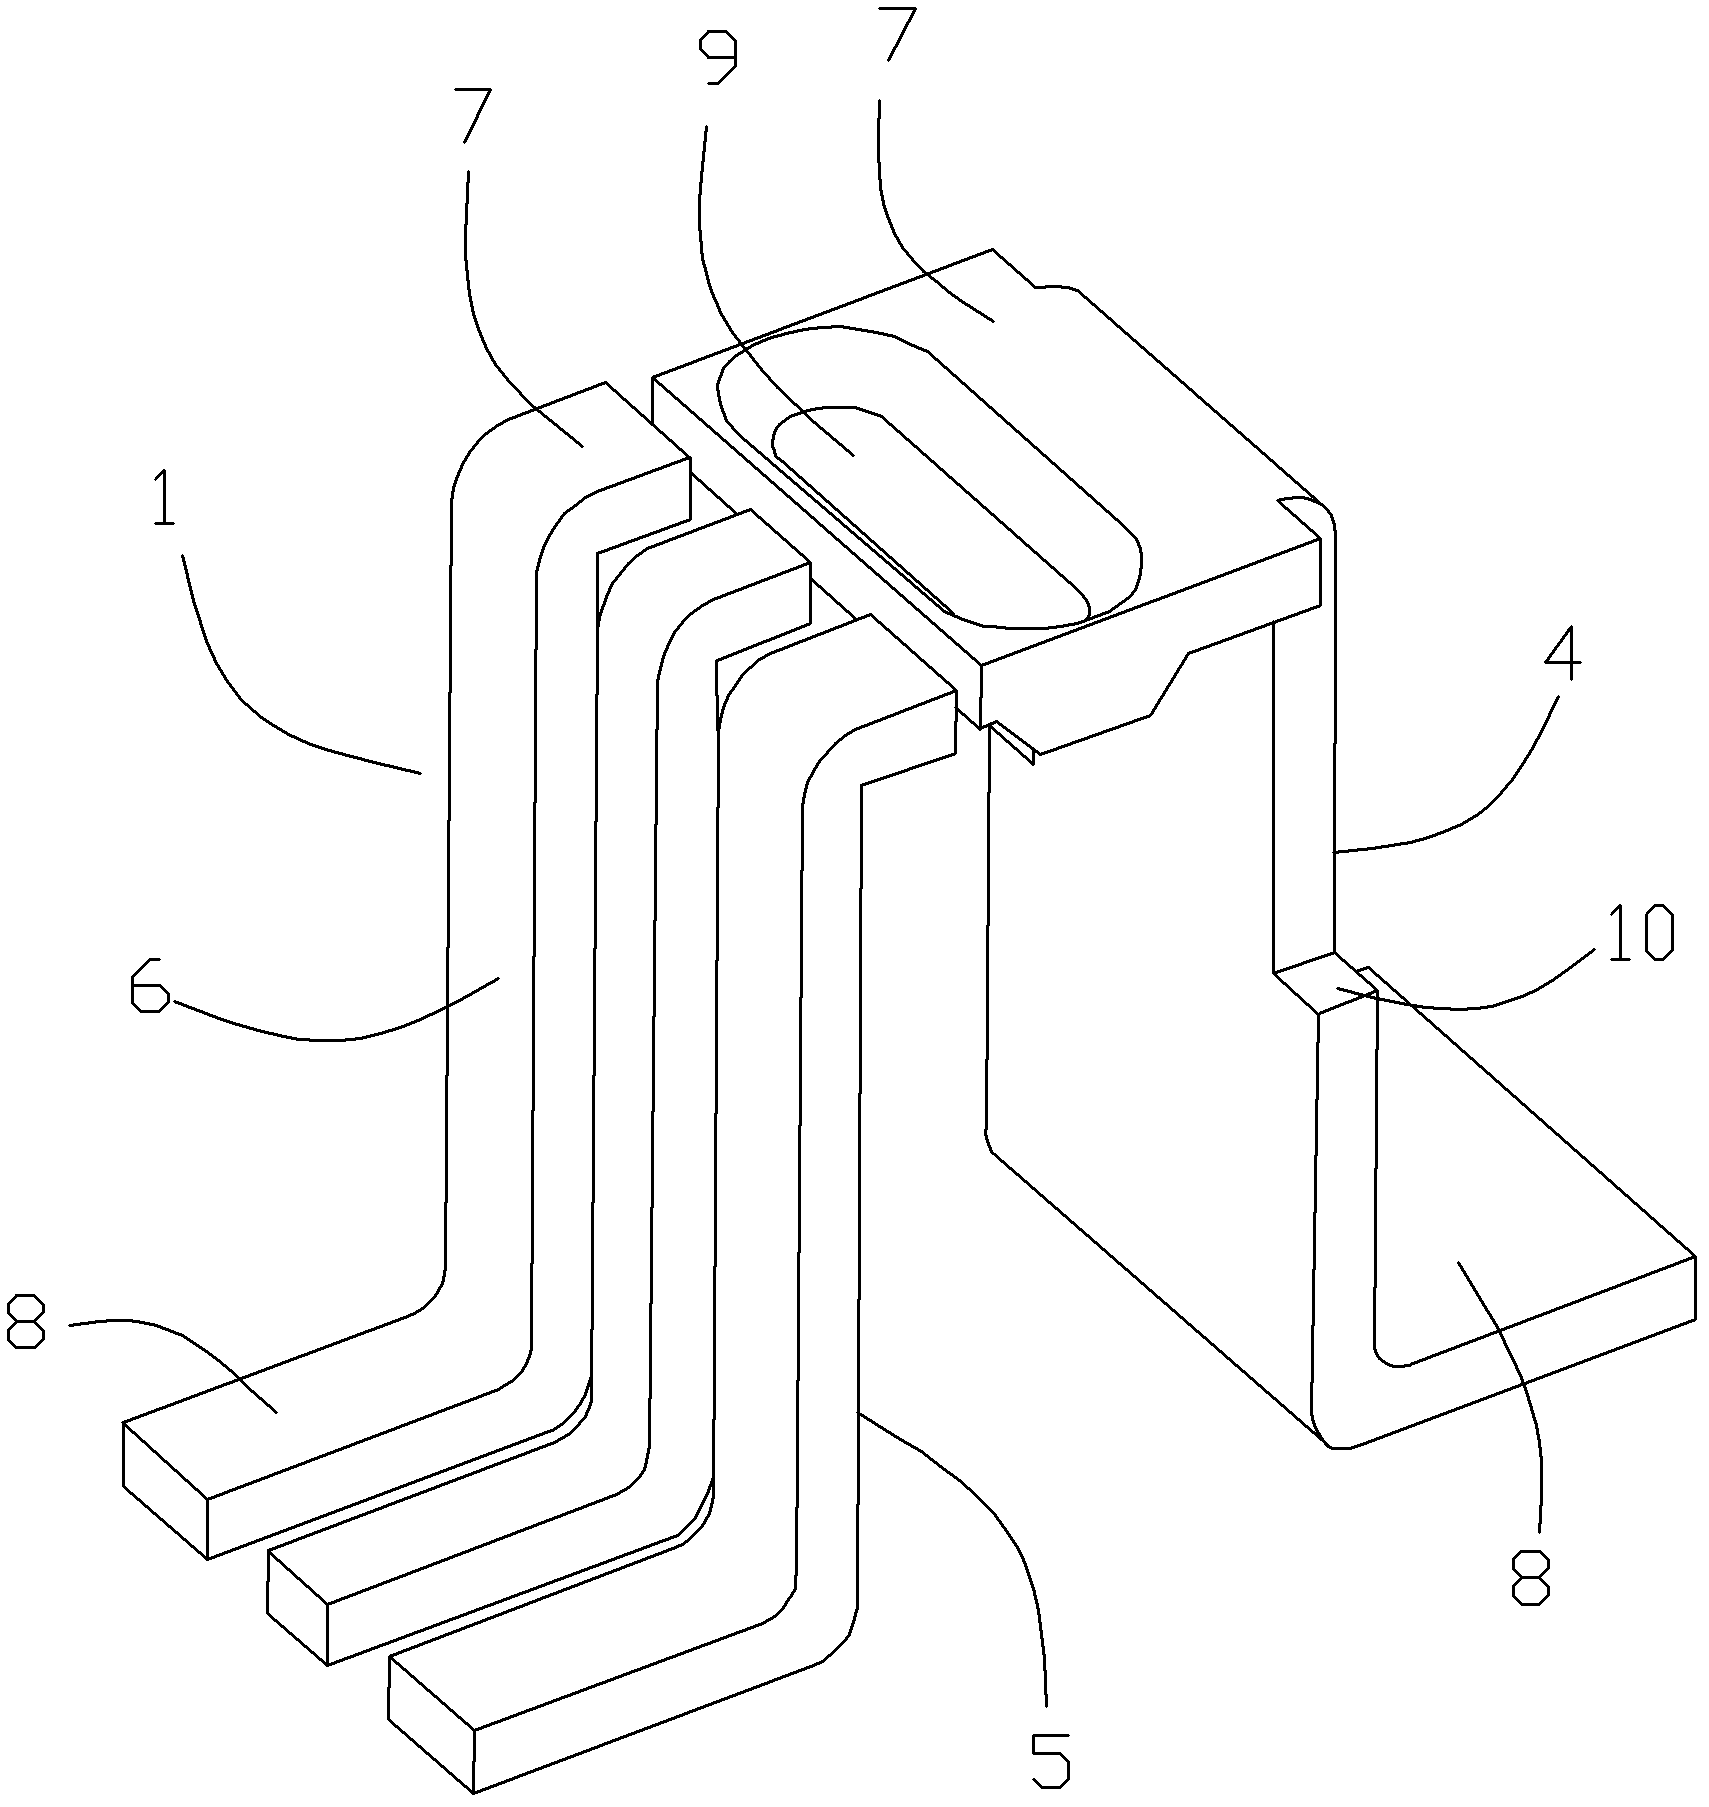 Three-channel electrode-sharing light-emitting diode (LED) lamp of lens structure